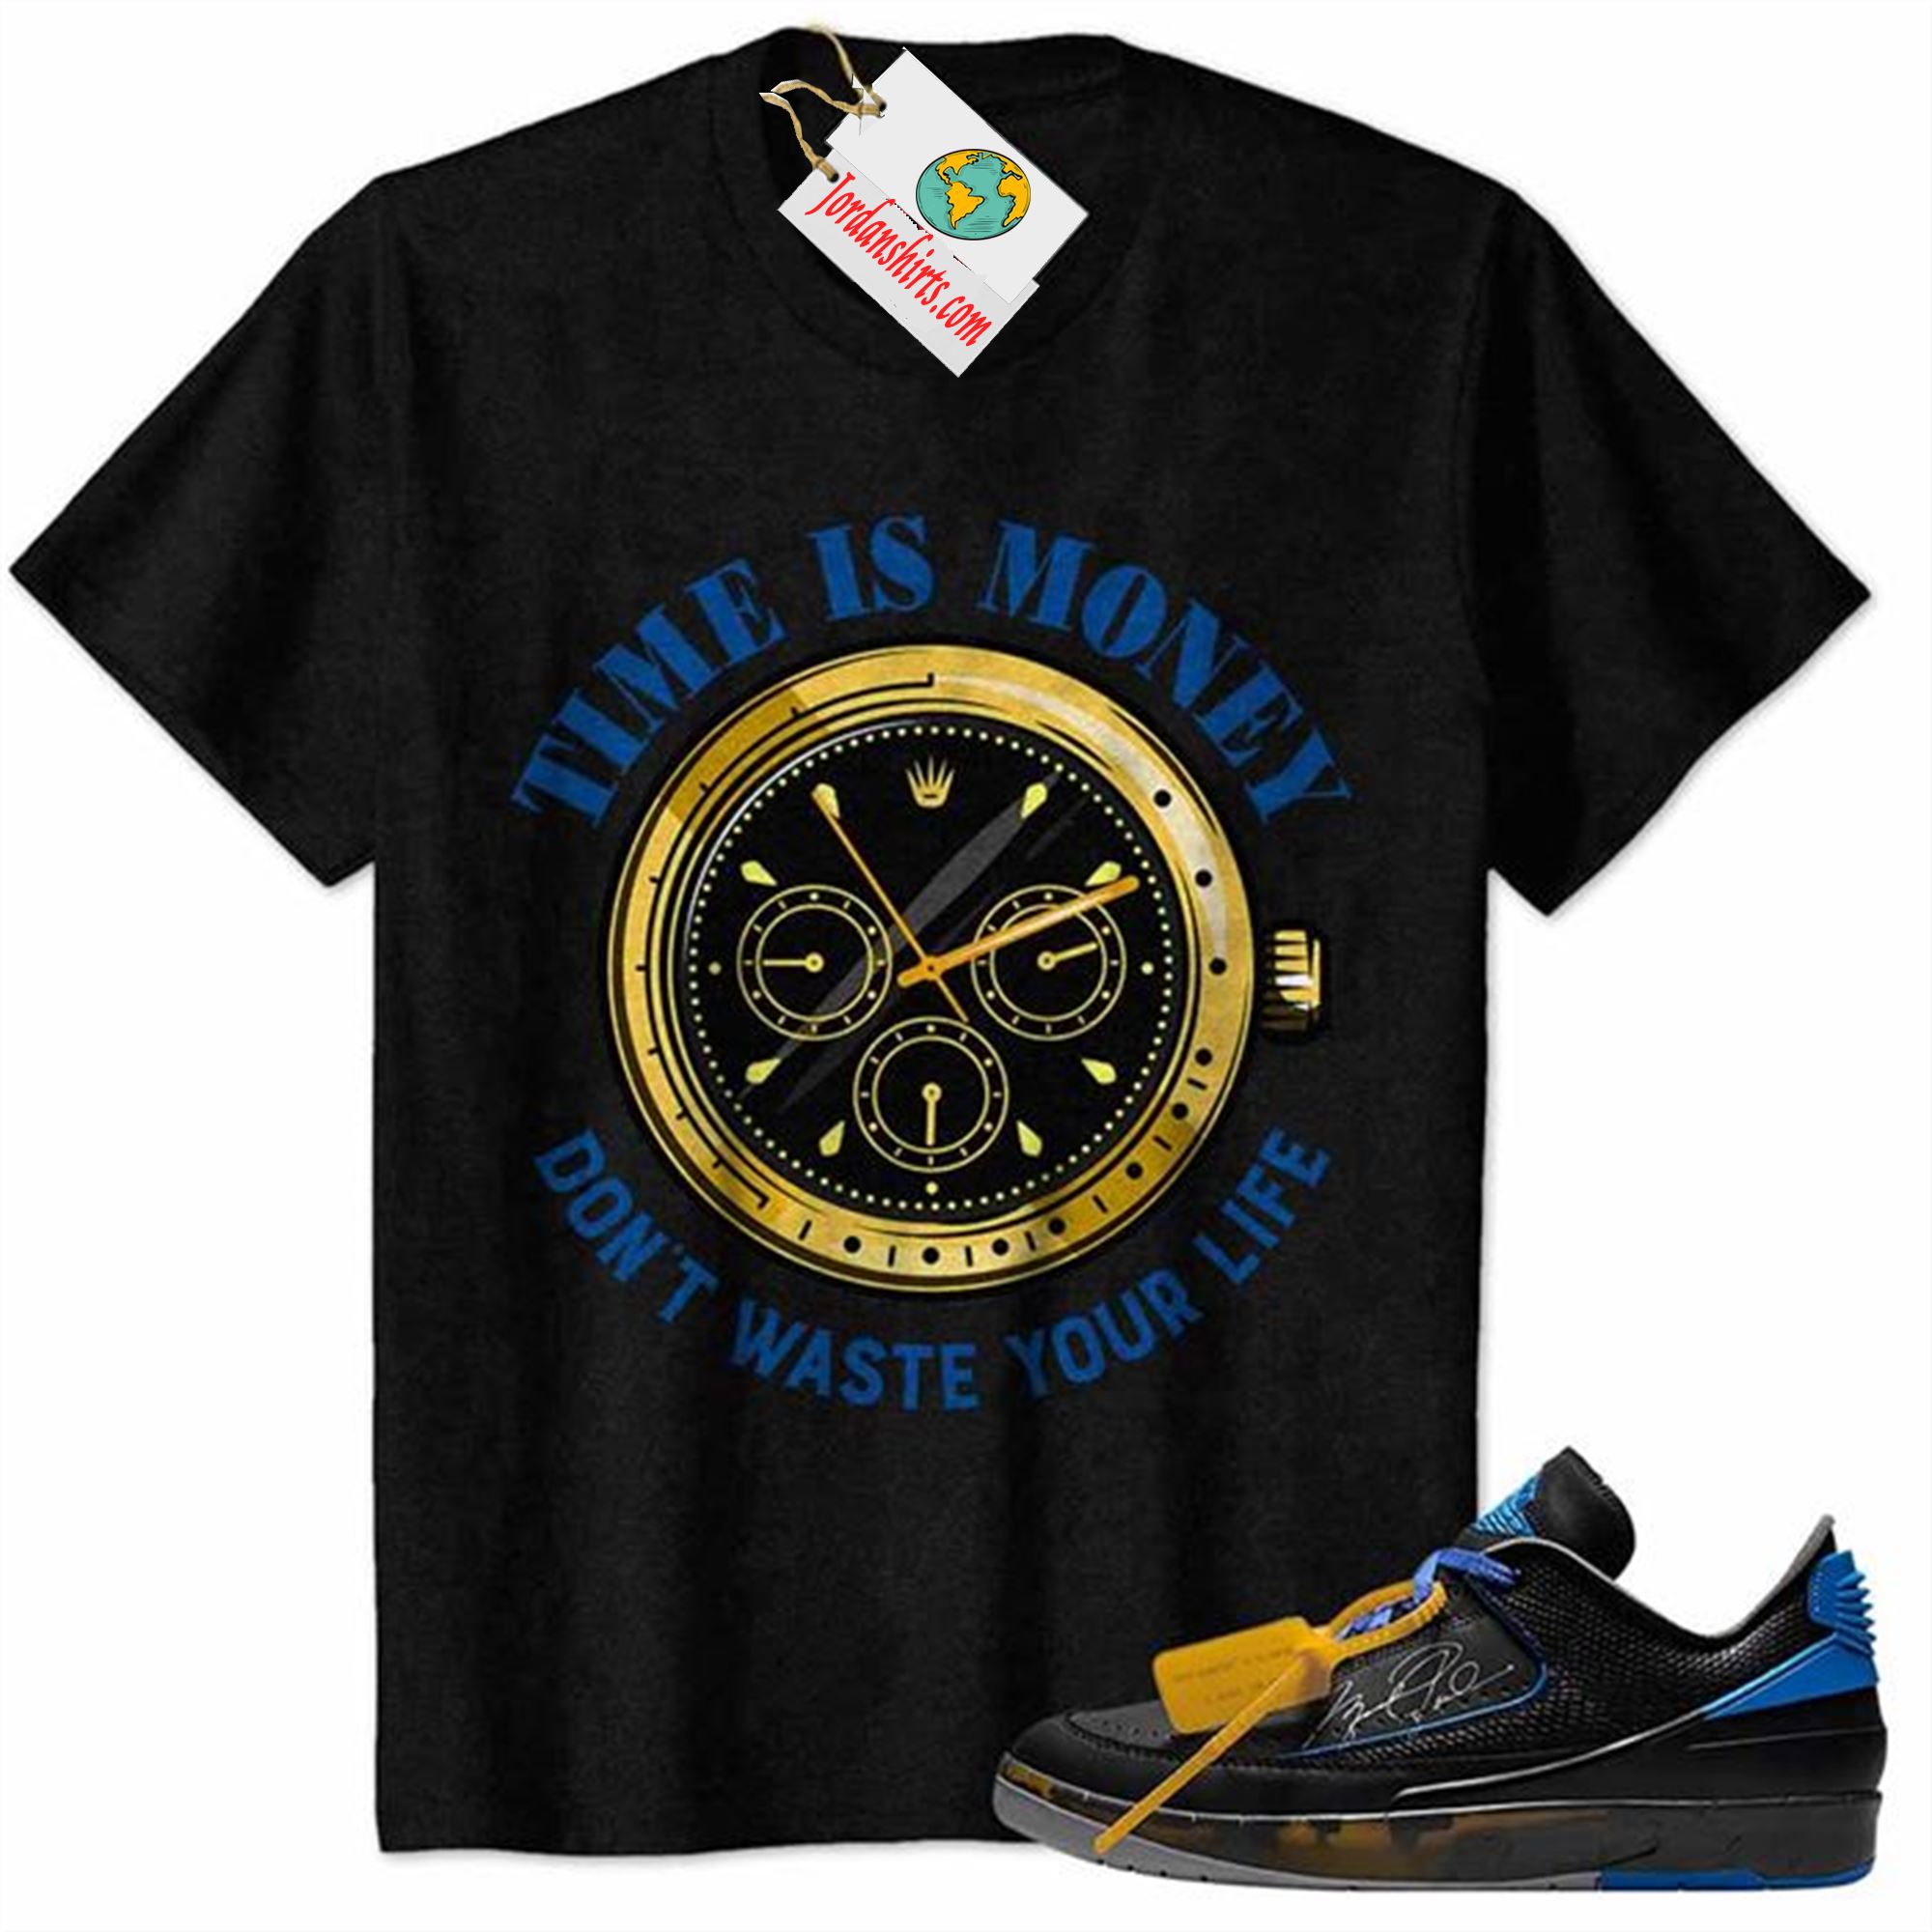 Jordan 2 Shirt, Time Is Money Dont Waste Your Life Black Air Jordan 2 Low X Off-white Black And Varsity Royal 2s Plus Size Up To 5xl